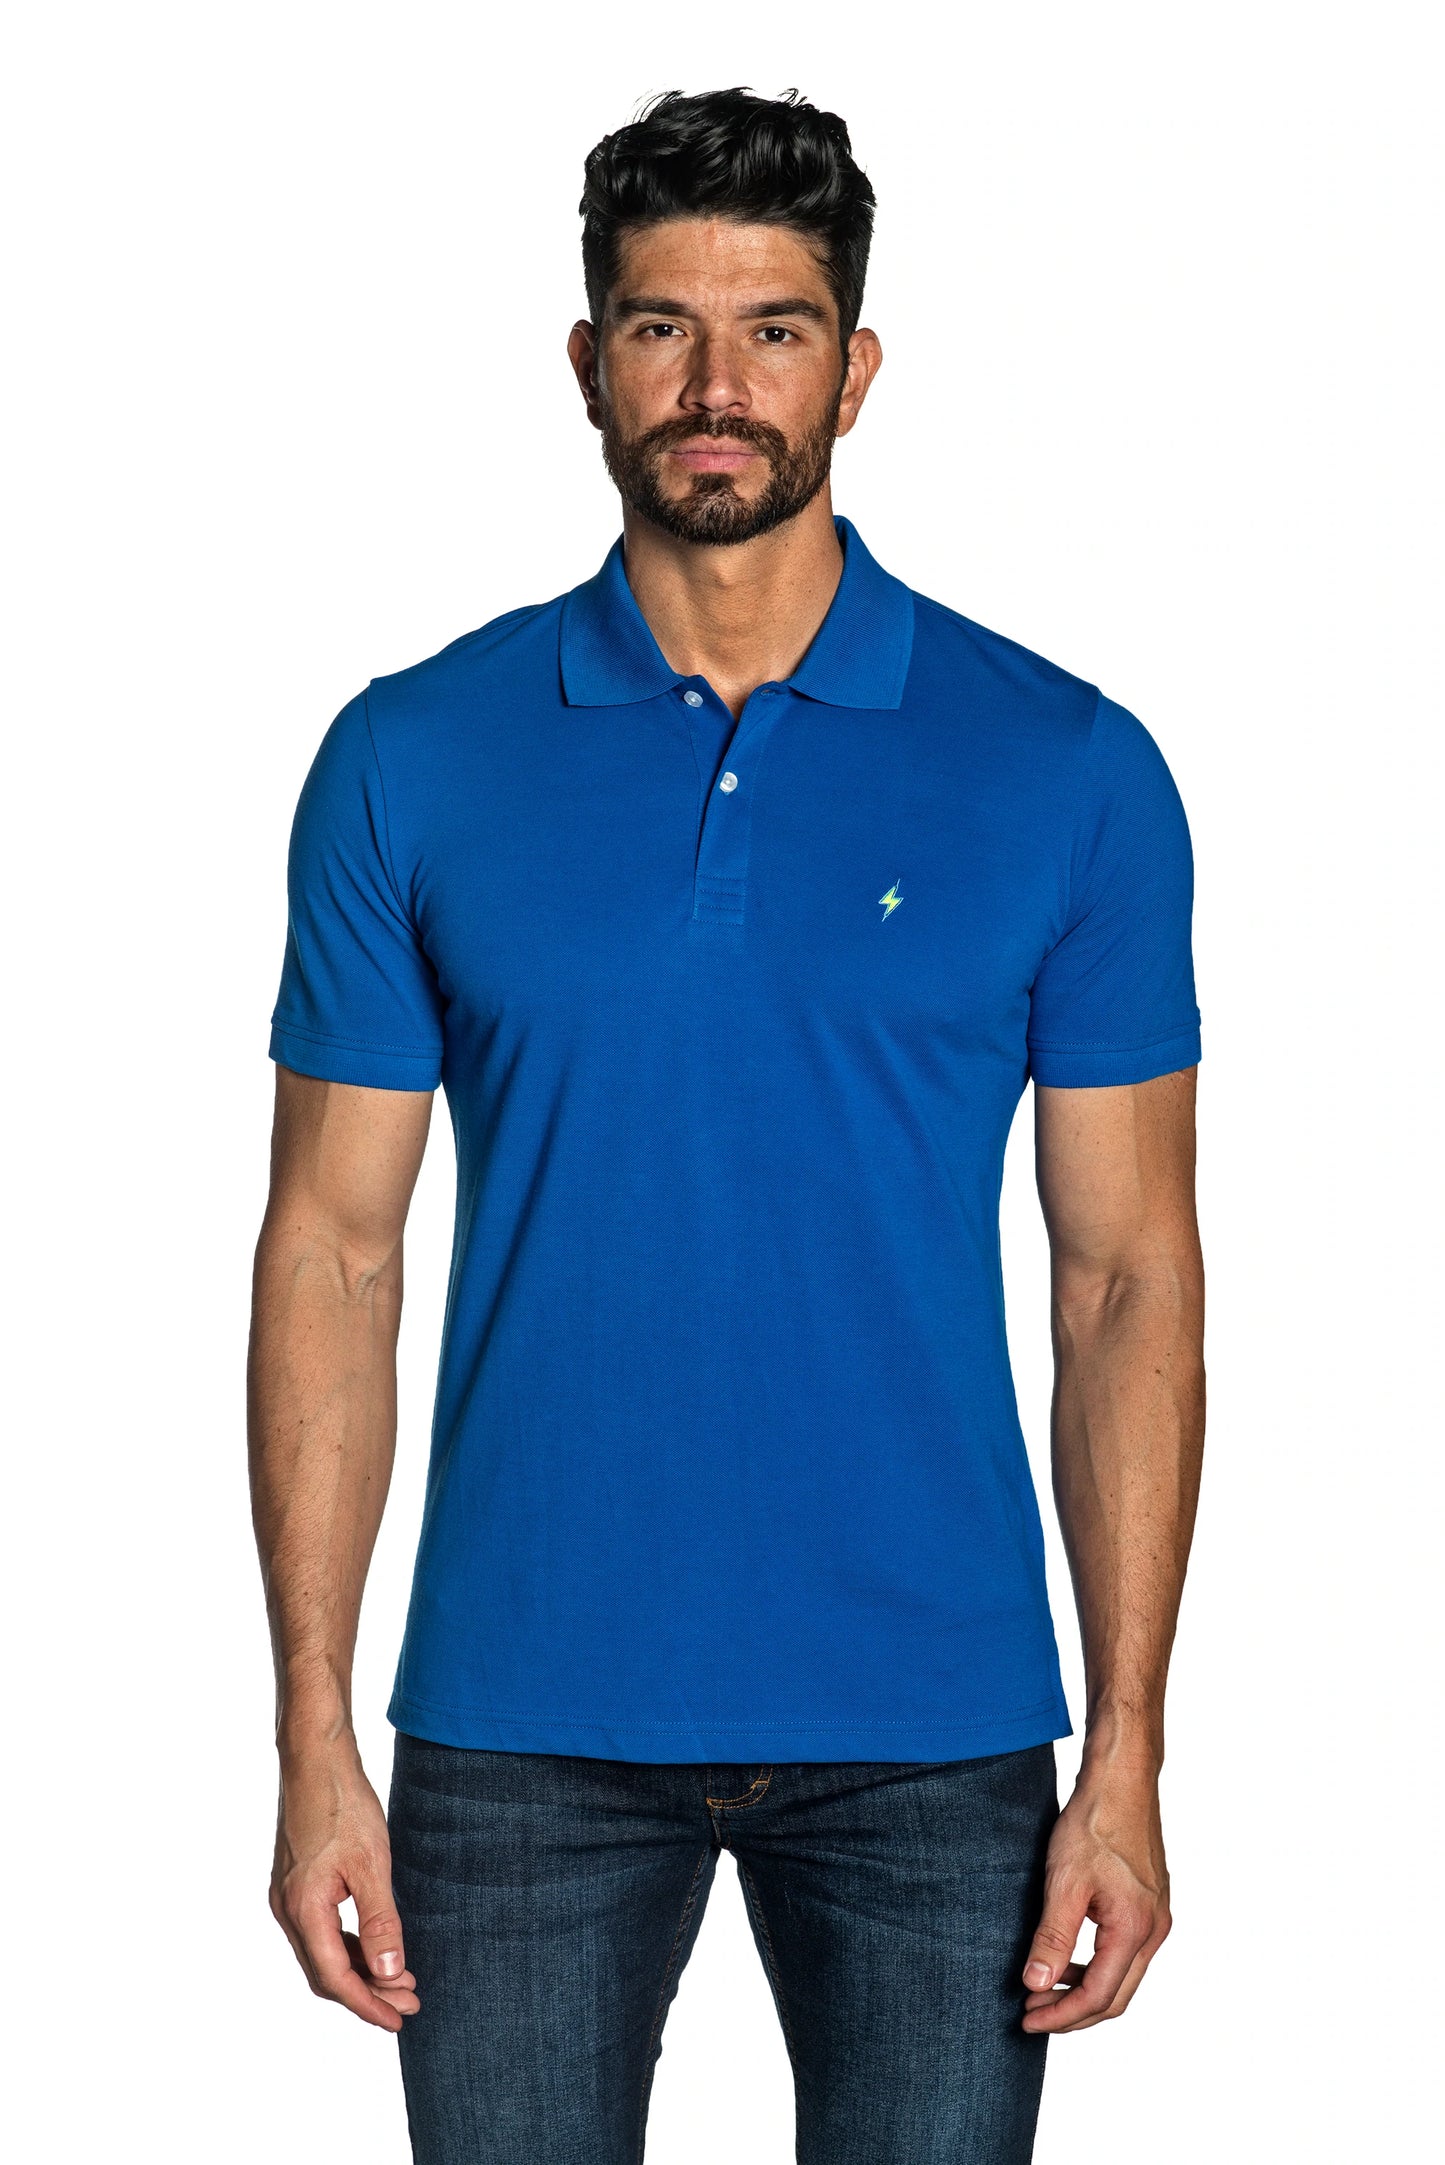 Jared Lang - Men's Polo With Lightning Bolt Embroidery